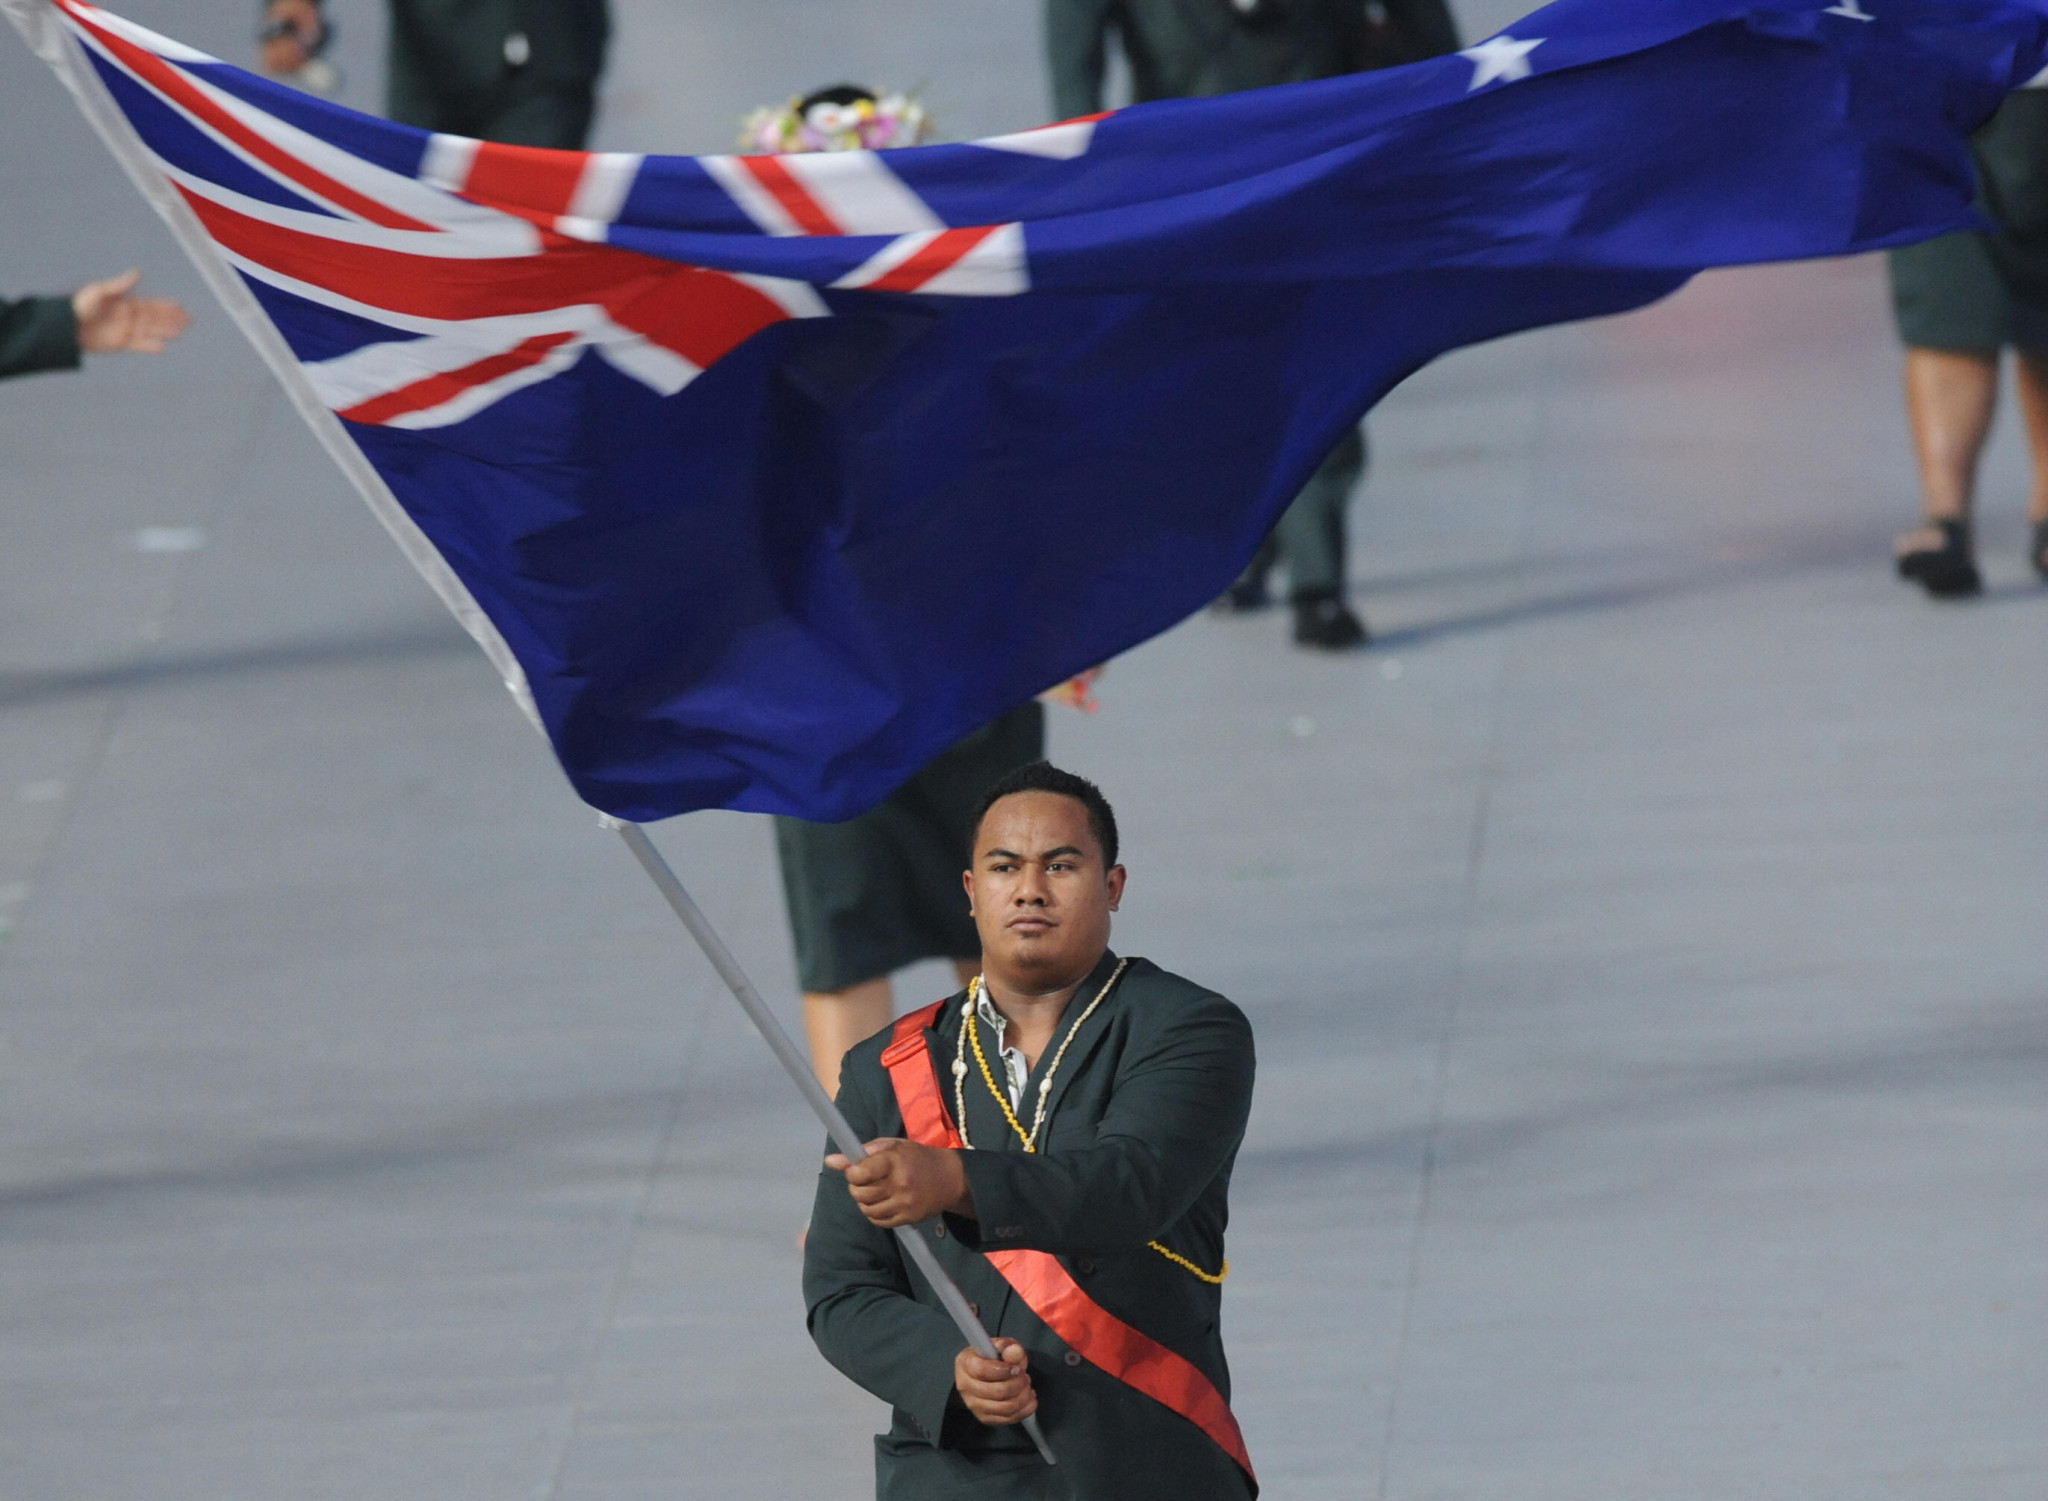 The Cook Islands has competed at every Summer Olympics since Seoul 1988 ©Getty Images